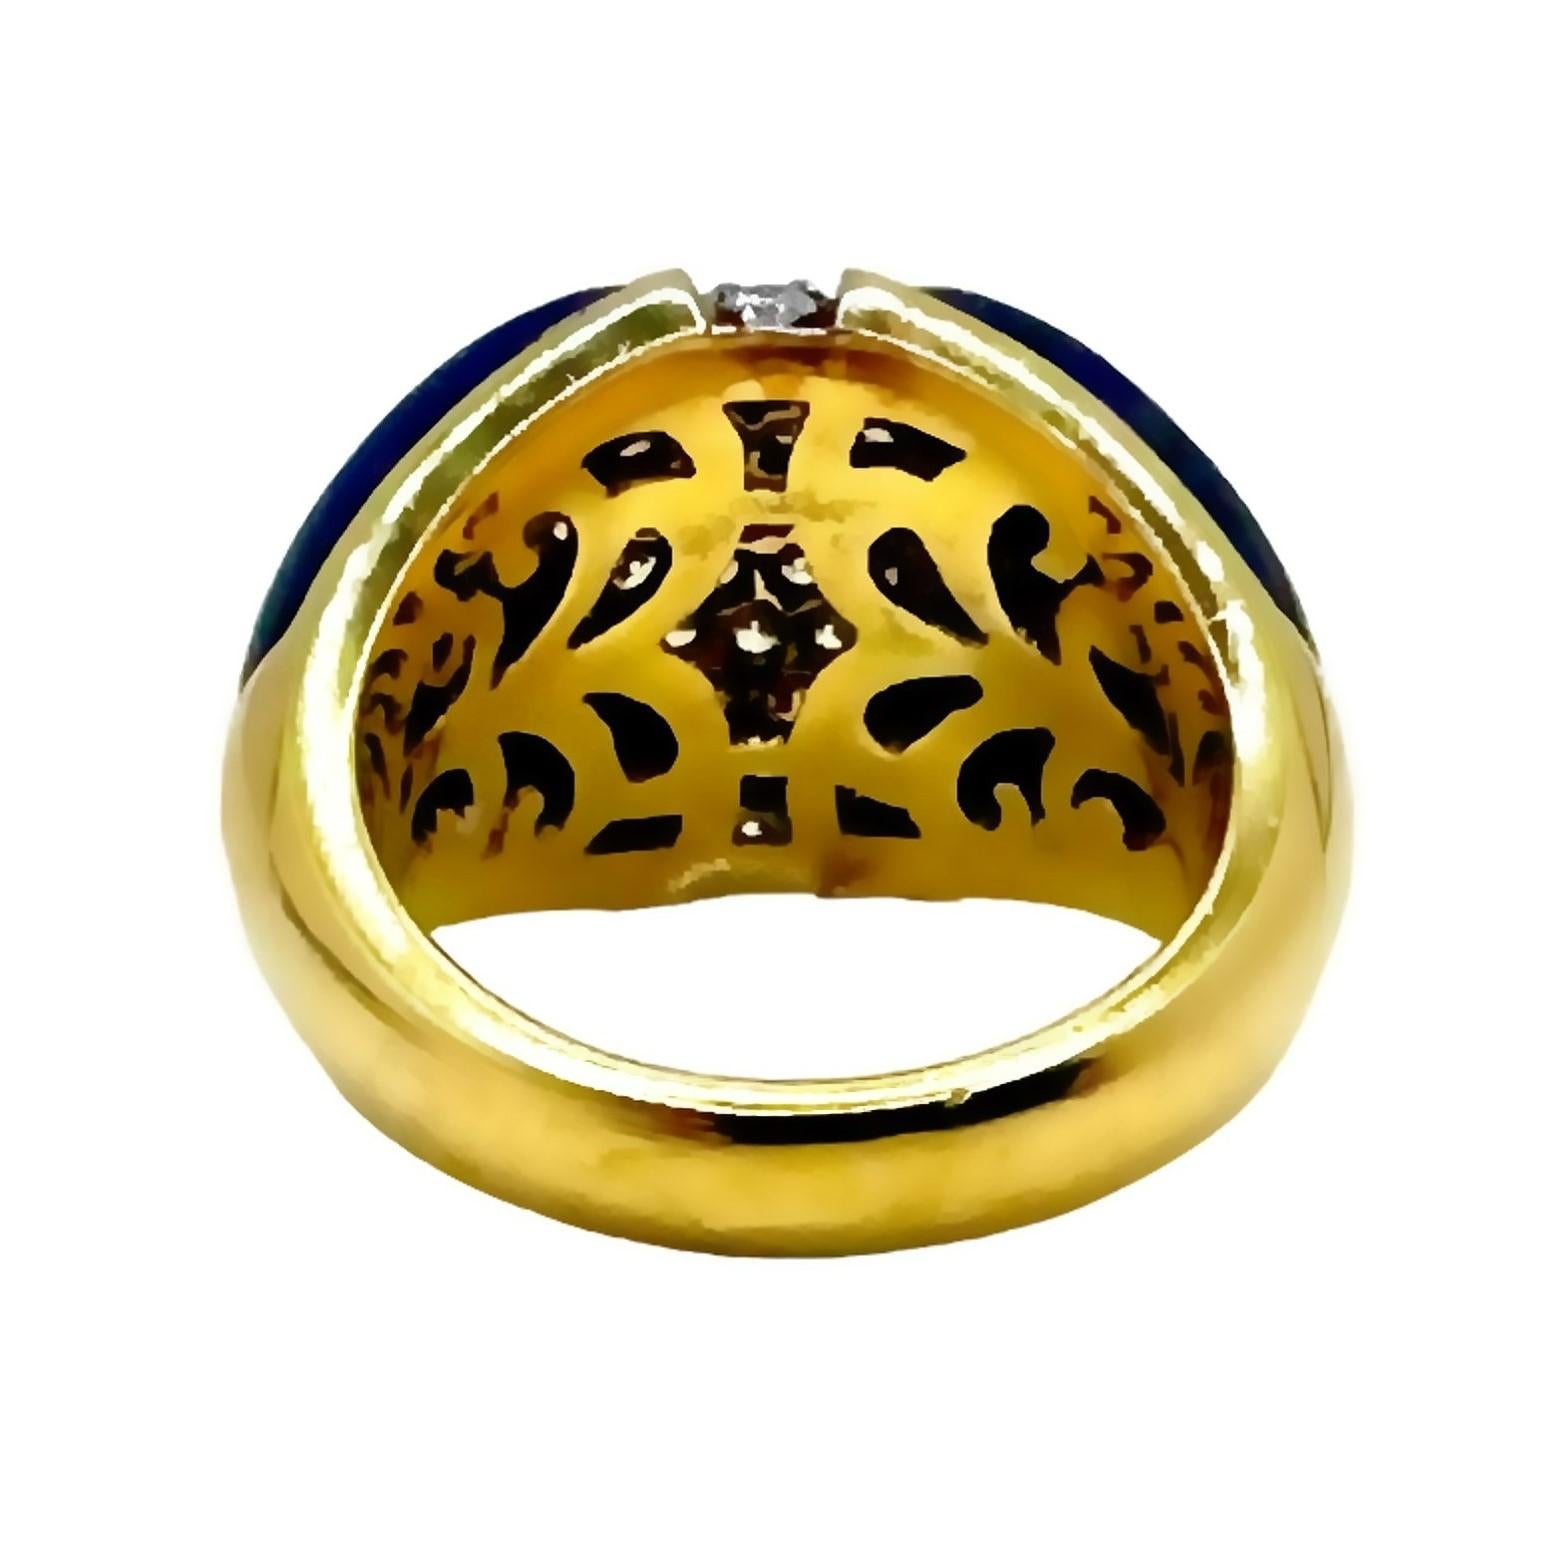 Brilliant Cut Late-20th Century 18k Yellow Gold, Lapis-Lazuli and Diamond Fashion Ring For Sale